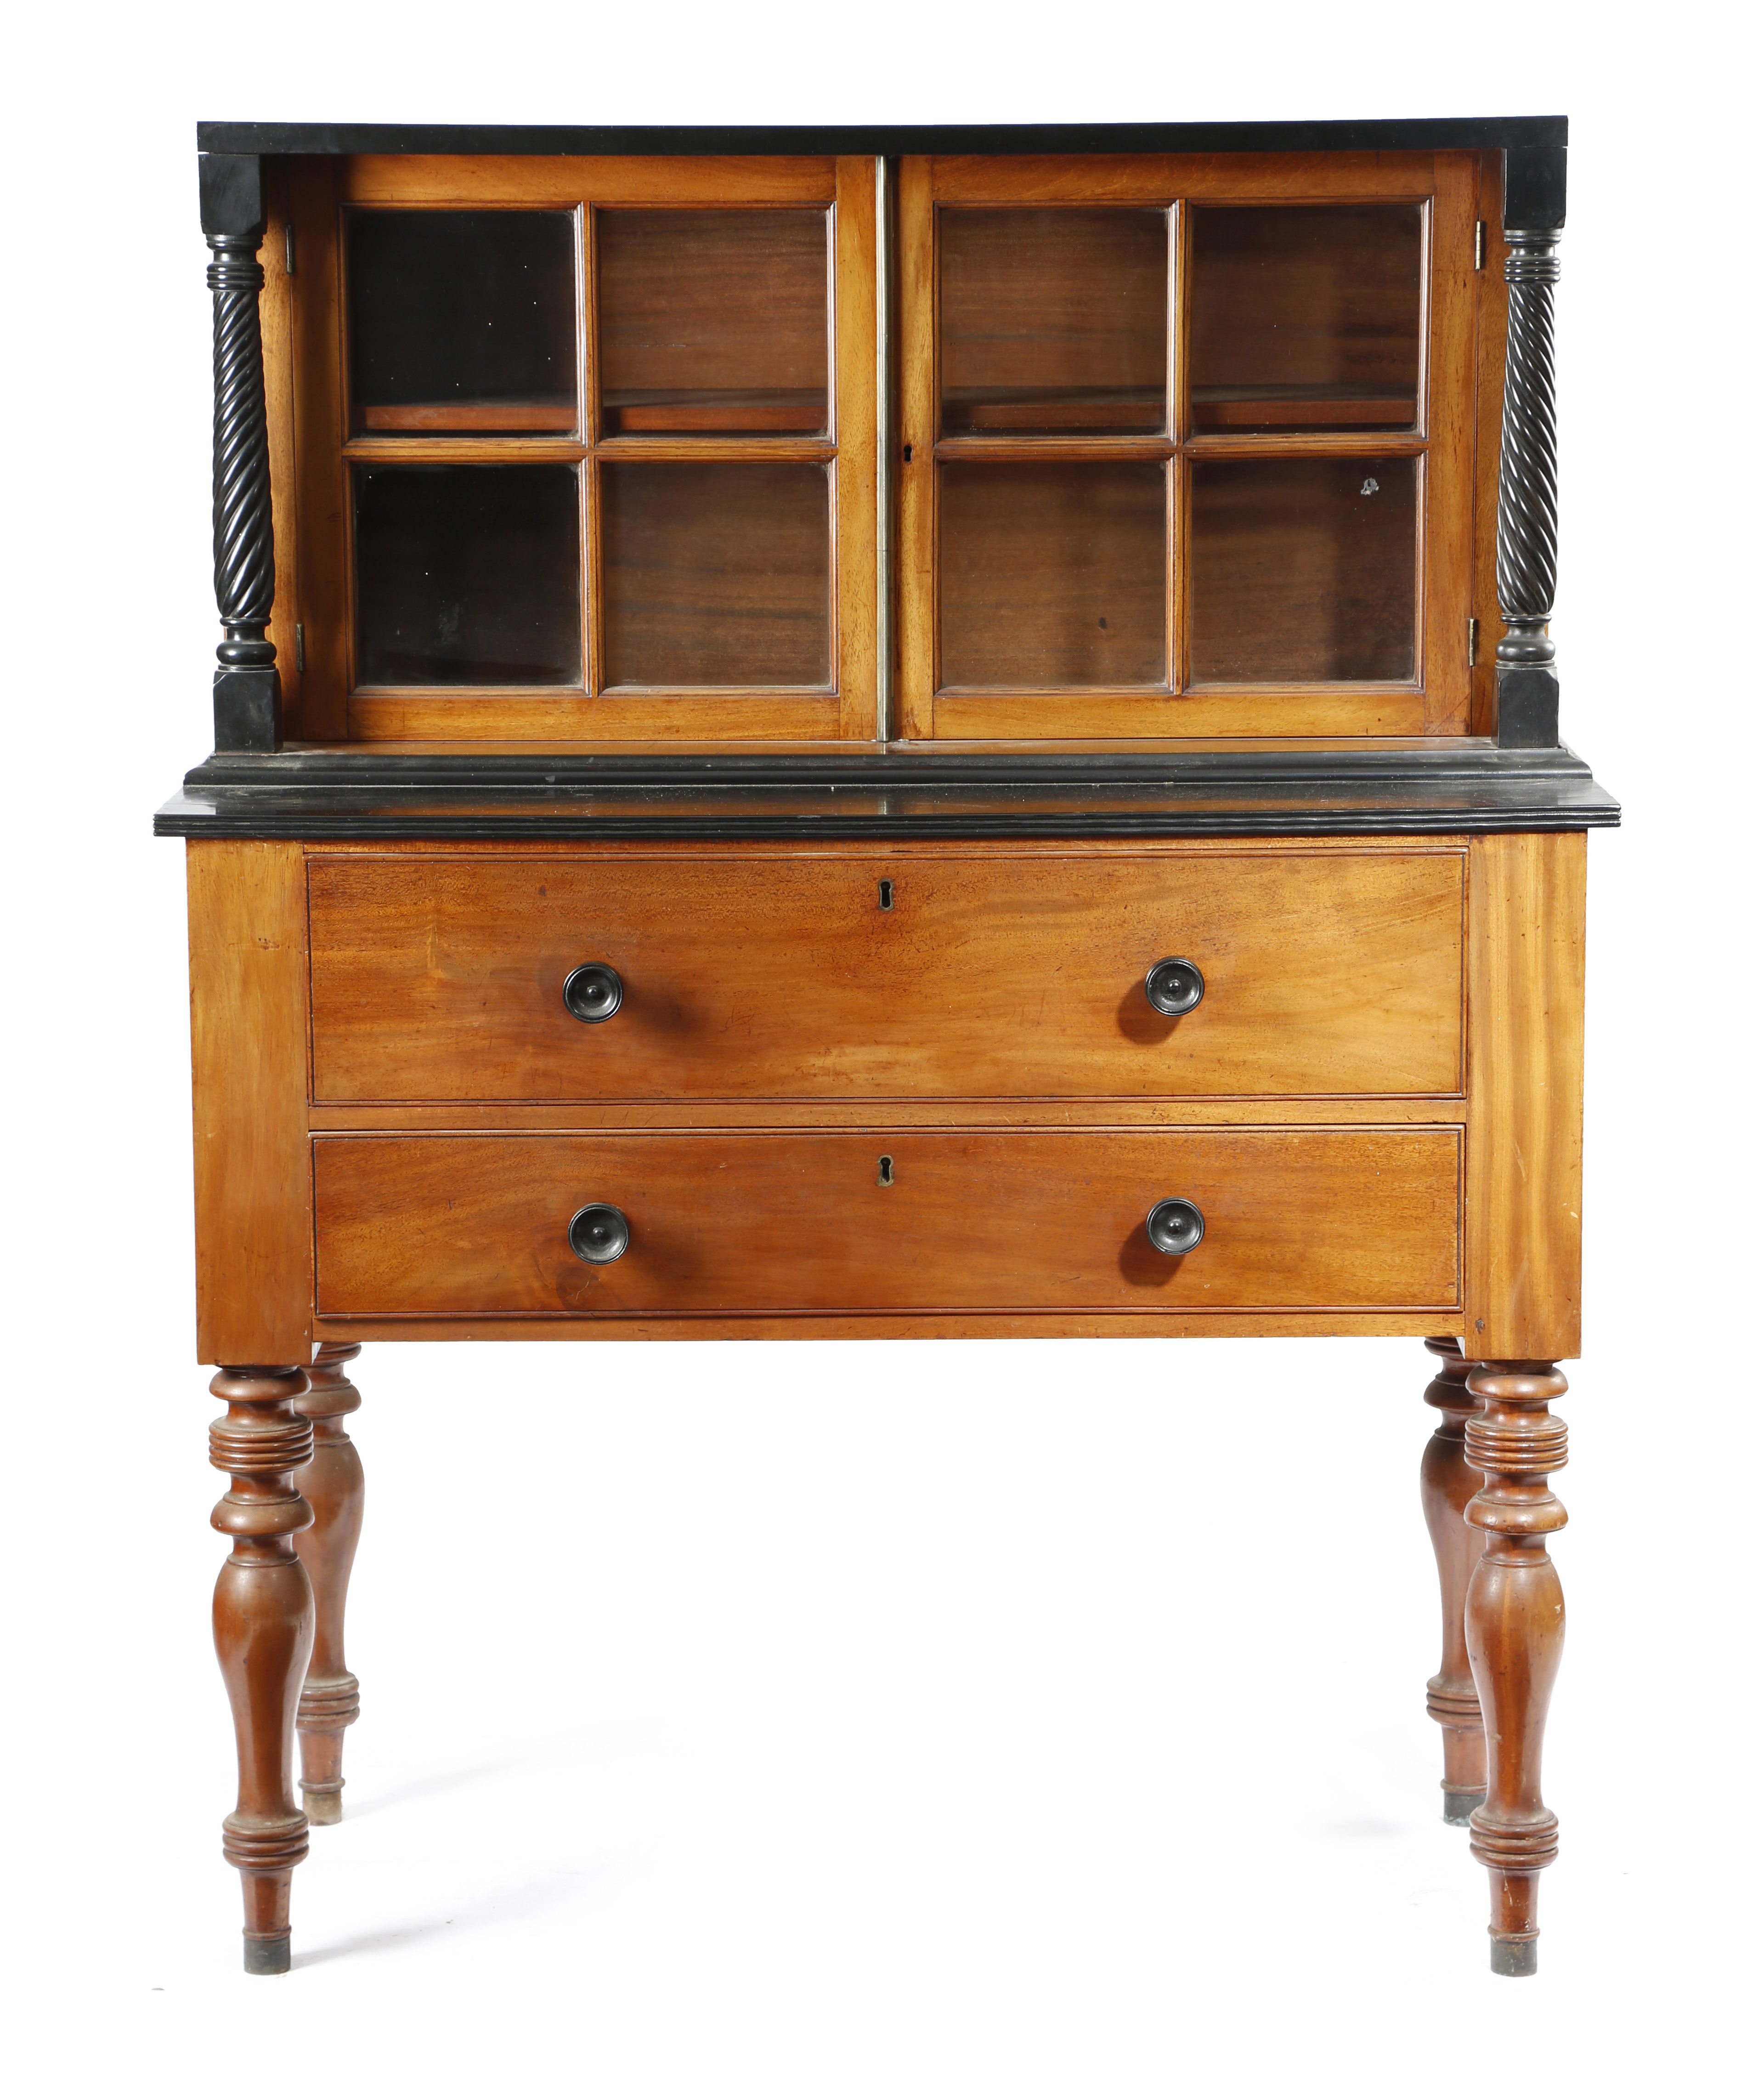 AN ANGLO-INDIAN EBONY AND TEAK SECRETAIRE CABINET CEYLONESE, LATE 19TH CENTURY with a pair of glazed